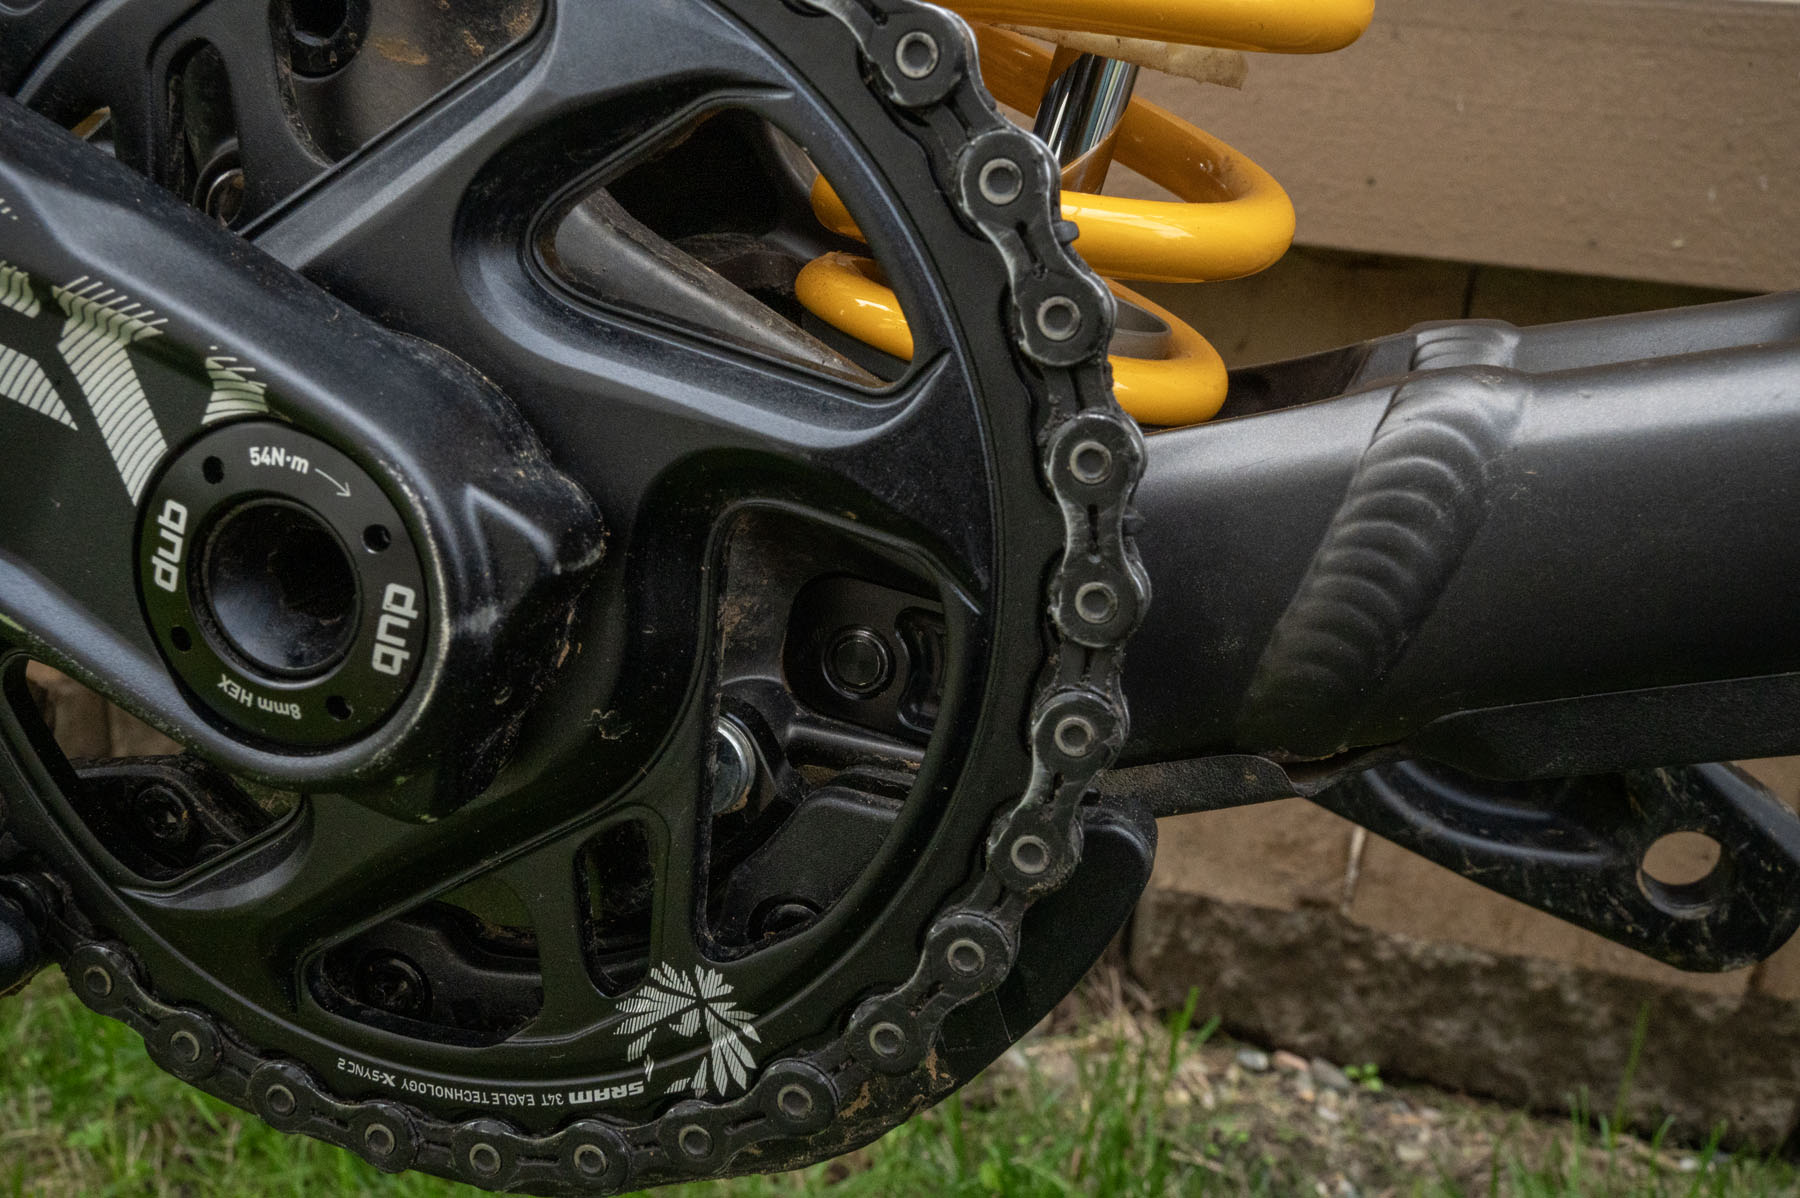 David Golay and Zack Henderson review the Commencal Supreme V5 for Blister